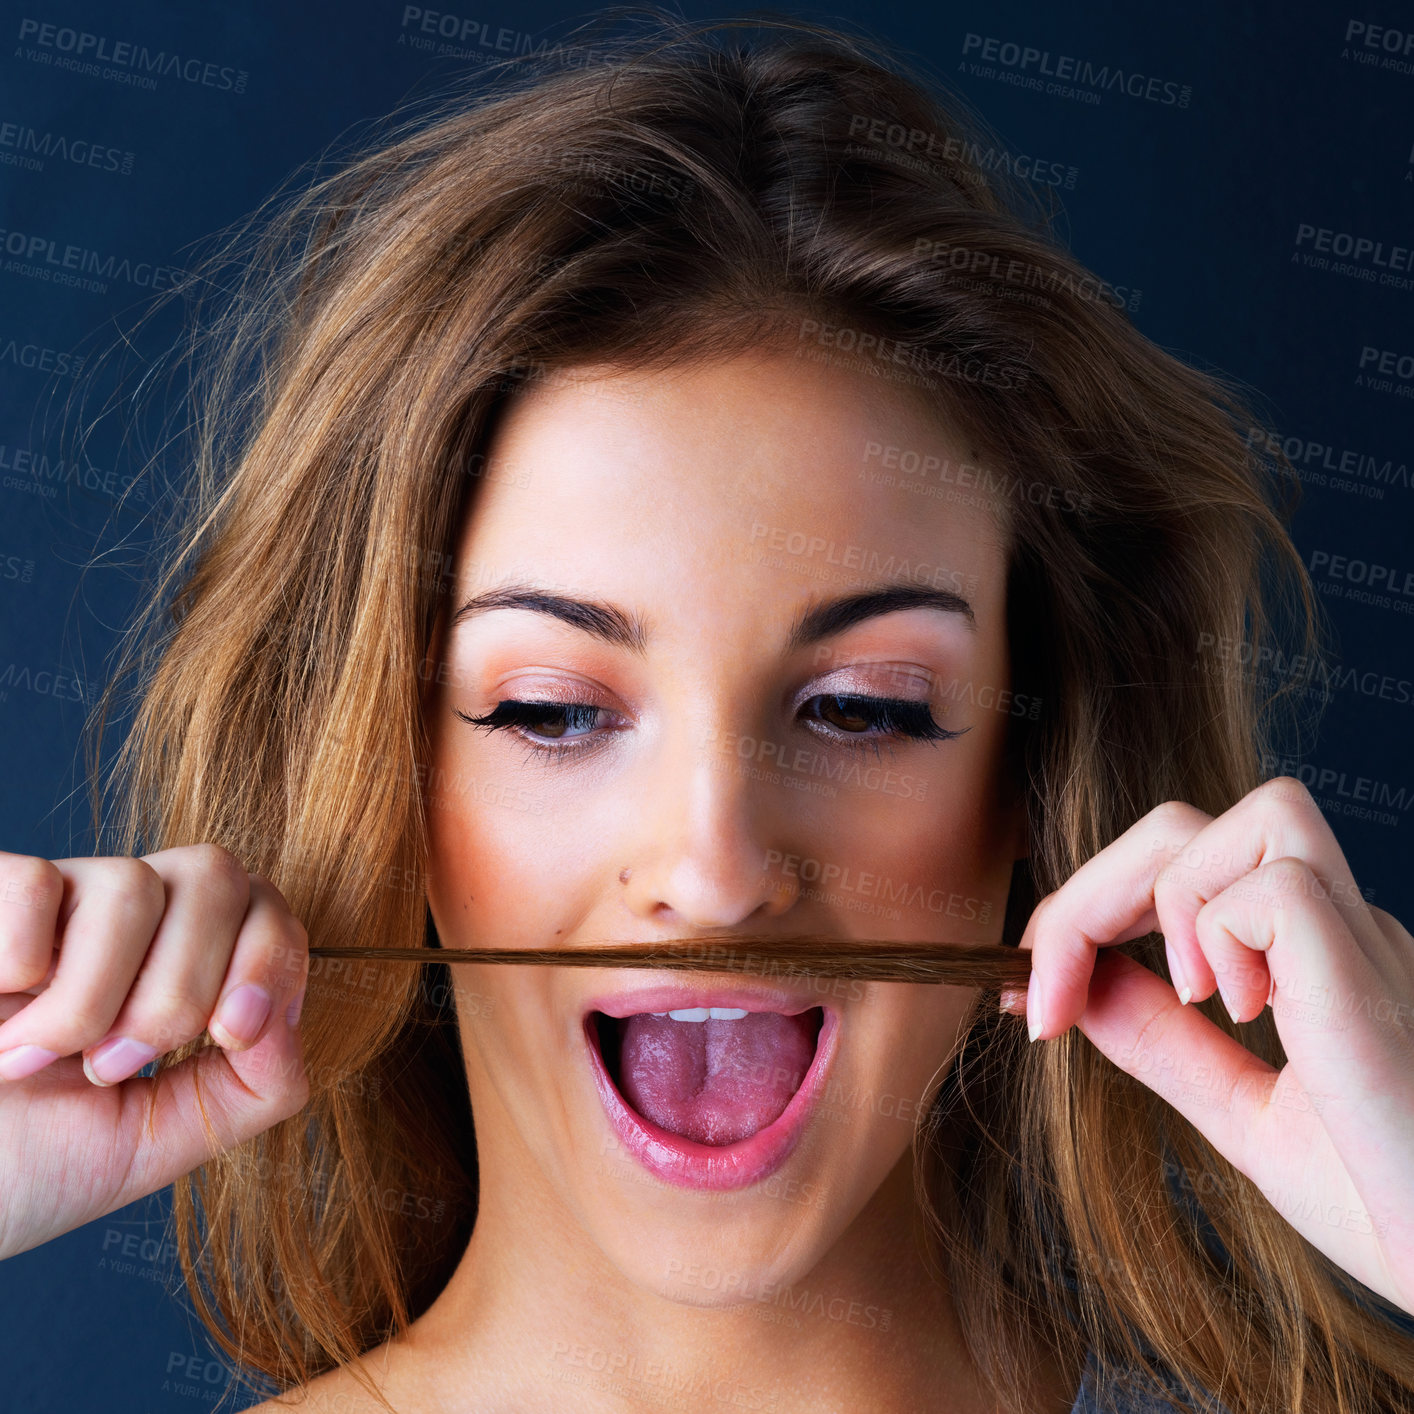 Buy stock photo Studio shot of a cute teenage girl making a mustache with her hair against a dark background